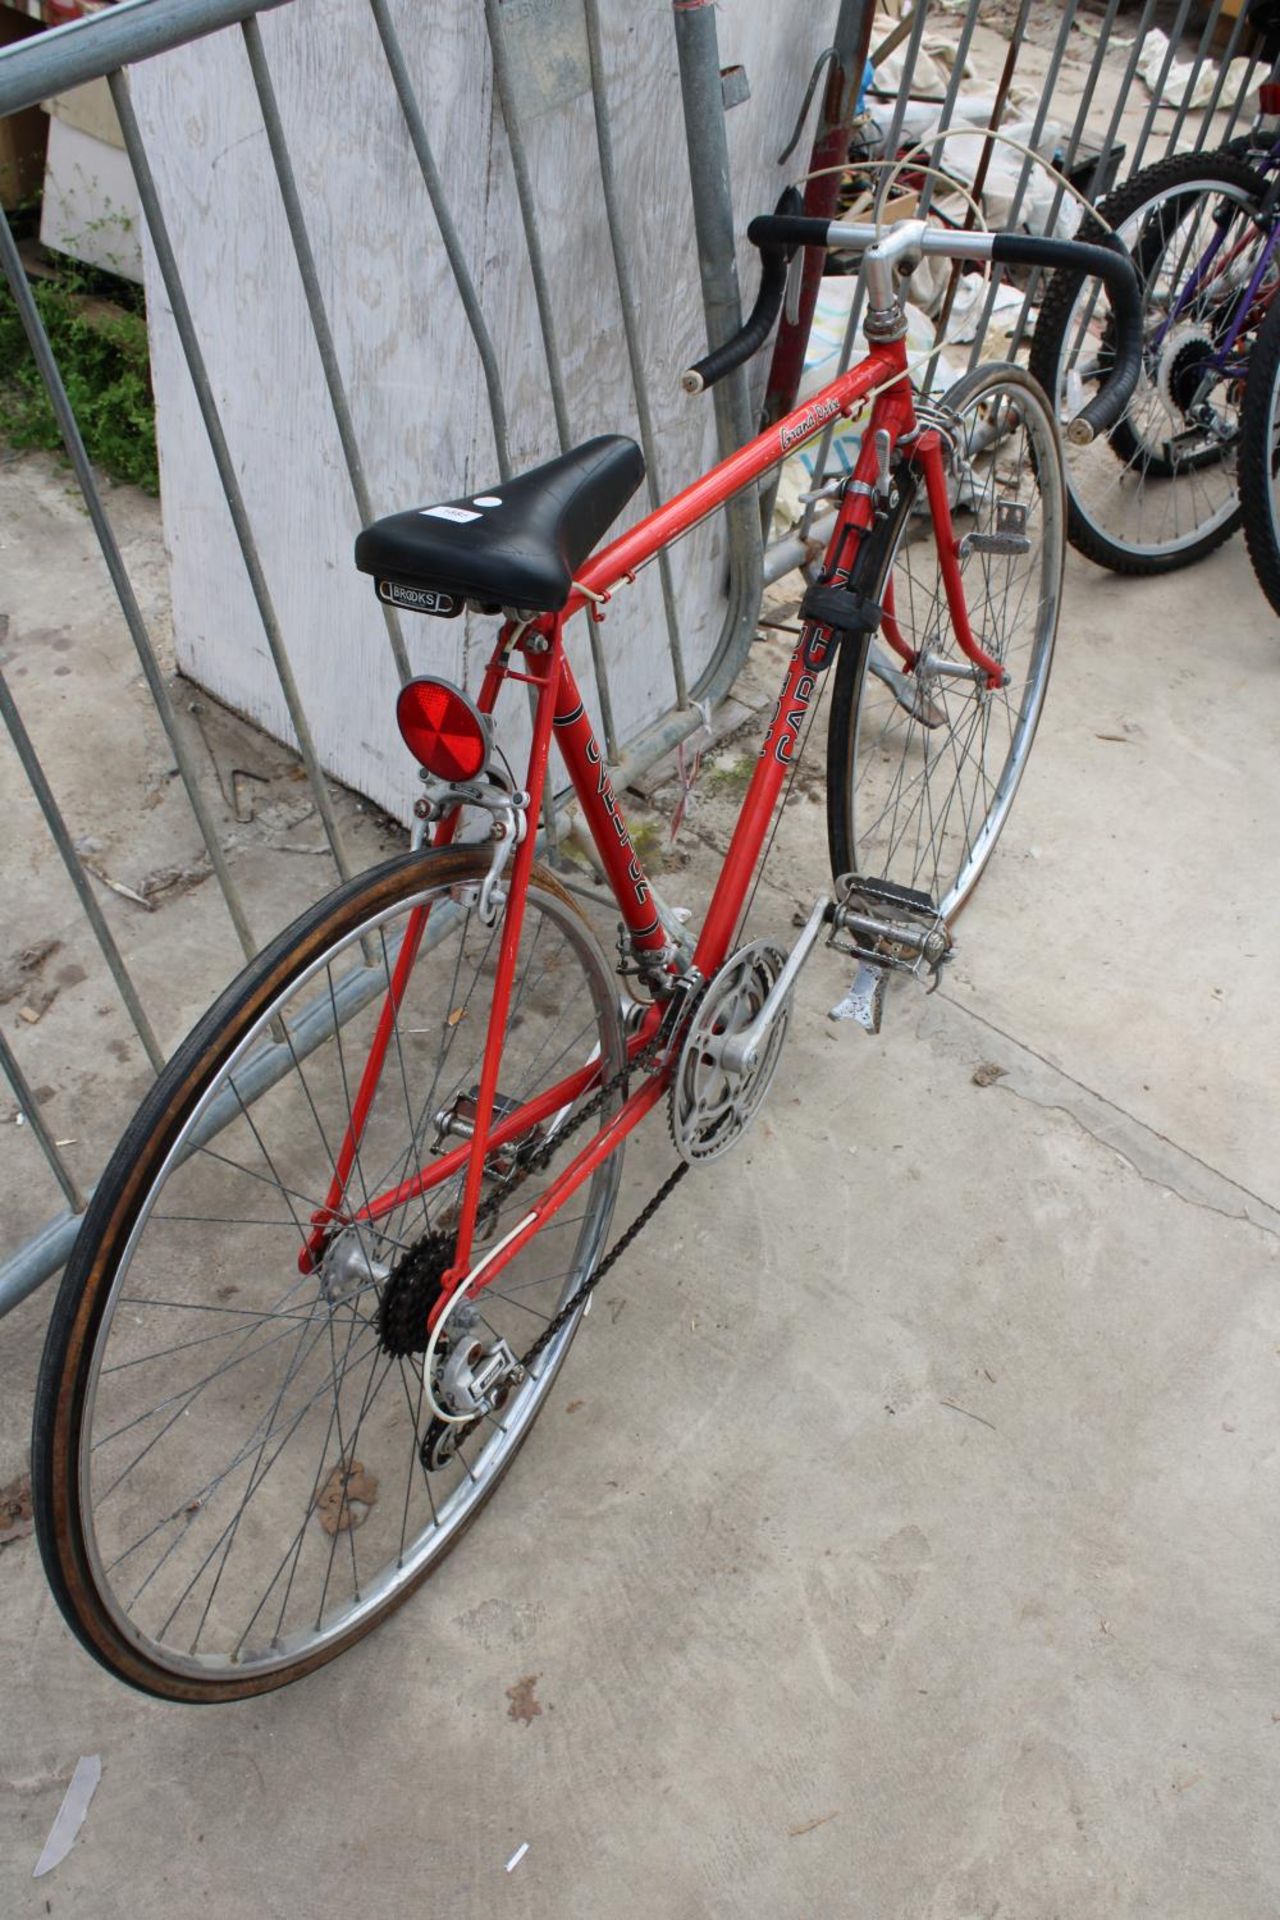 A VINTAGE CARLTON GRAND PRIX ROAD RACING BIKE WITH 10 SPEED GEAR SYSTEM - Image 2 of 3